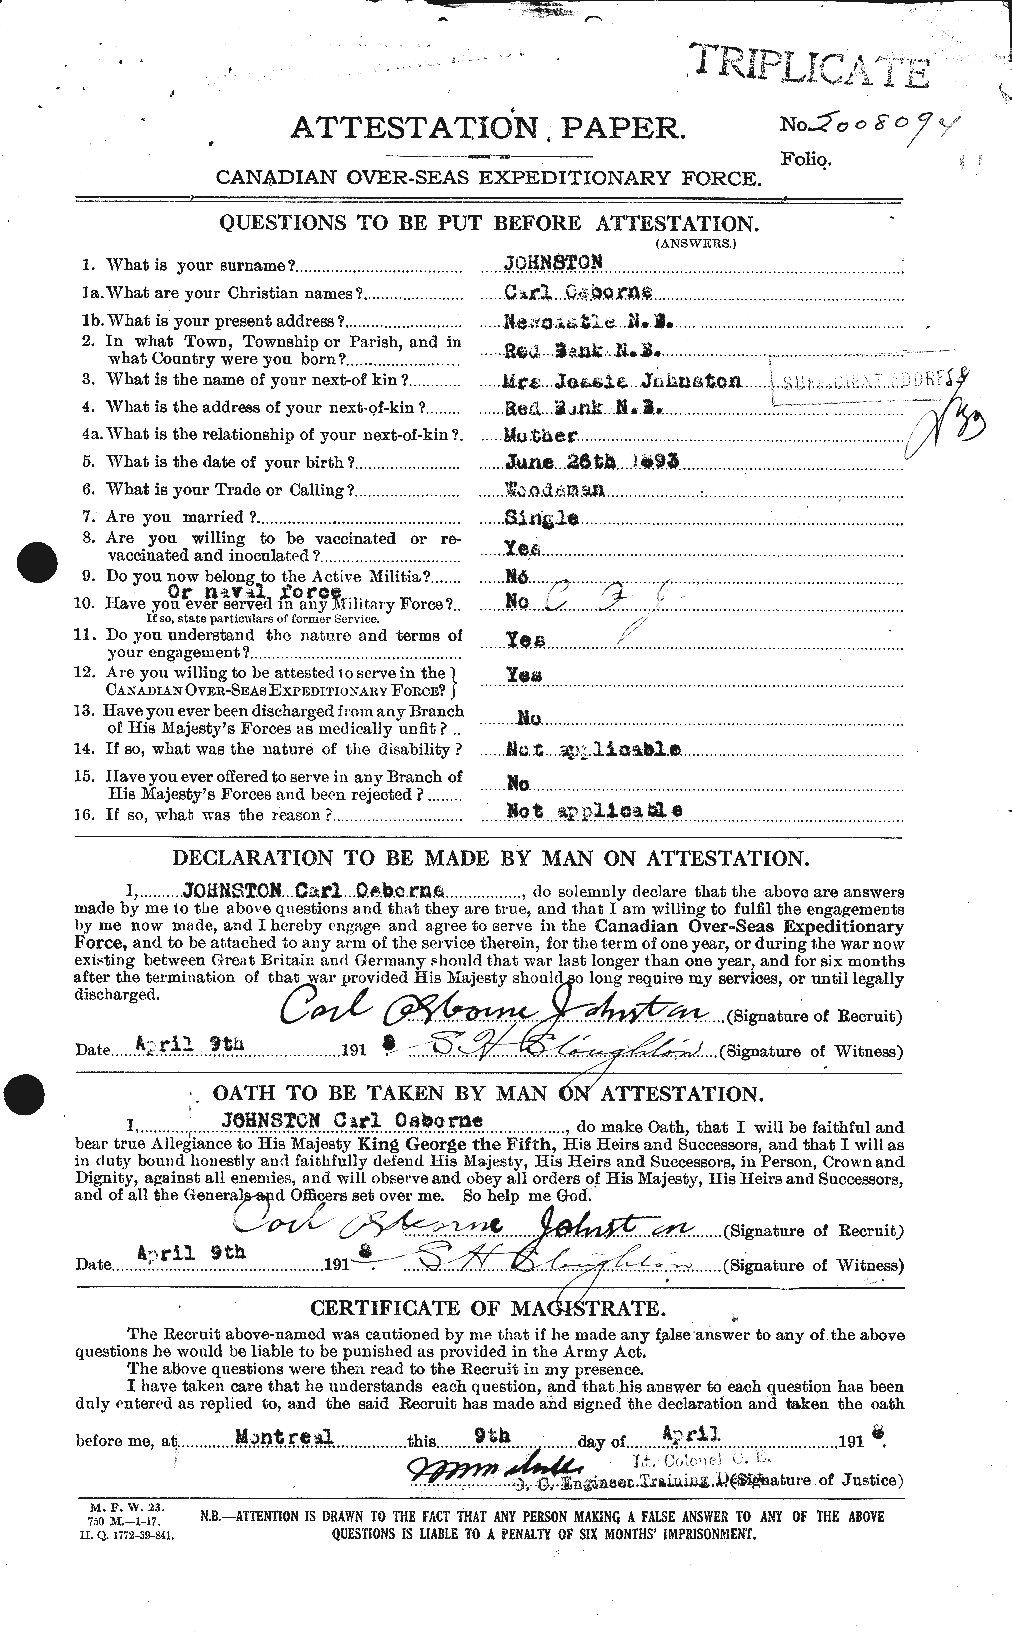 Personnel Records of the First World War - CEF 423081a